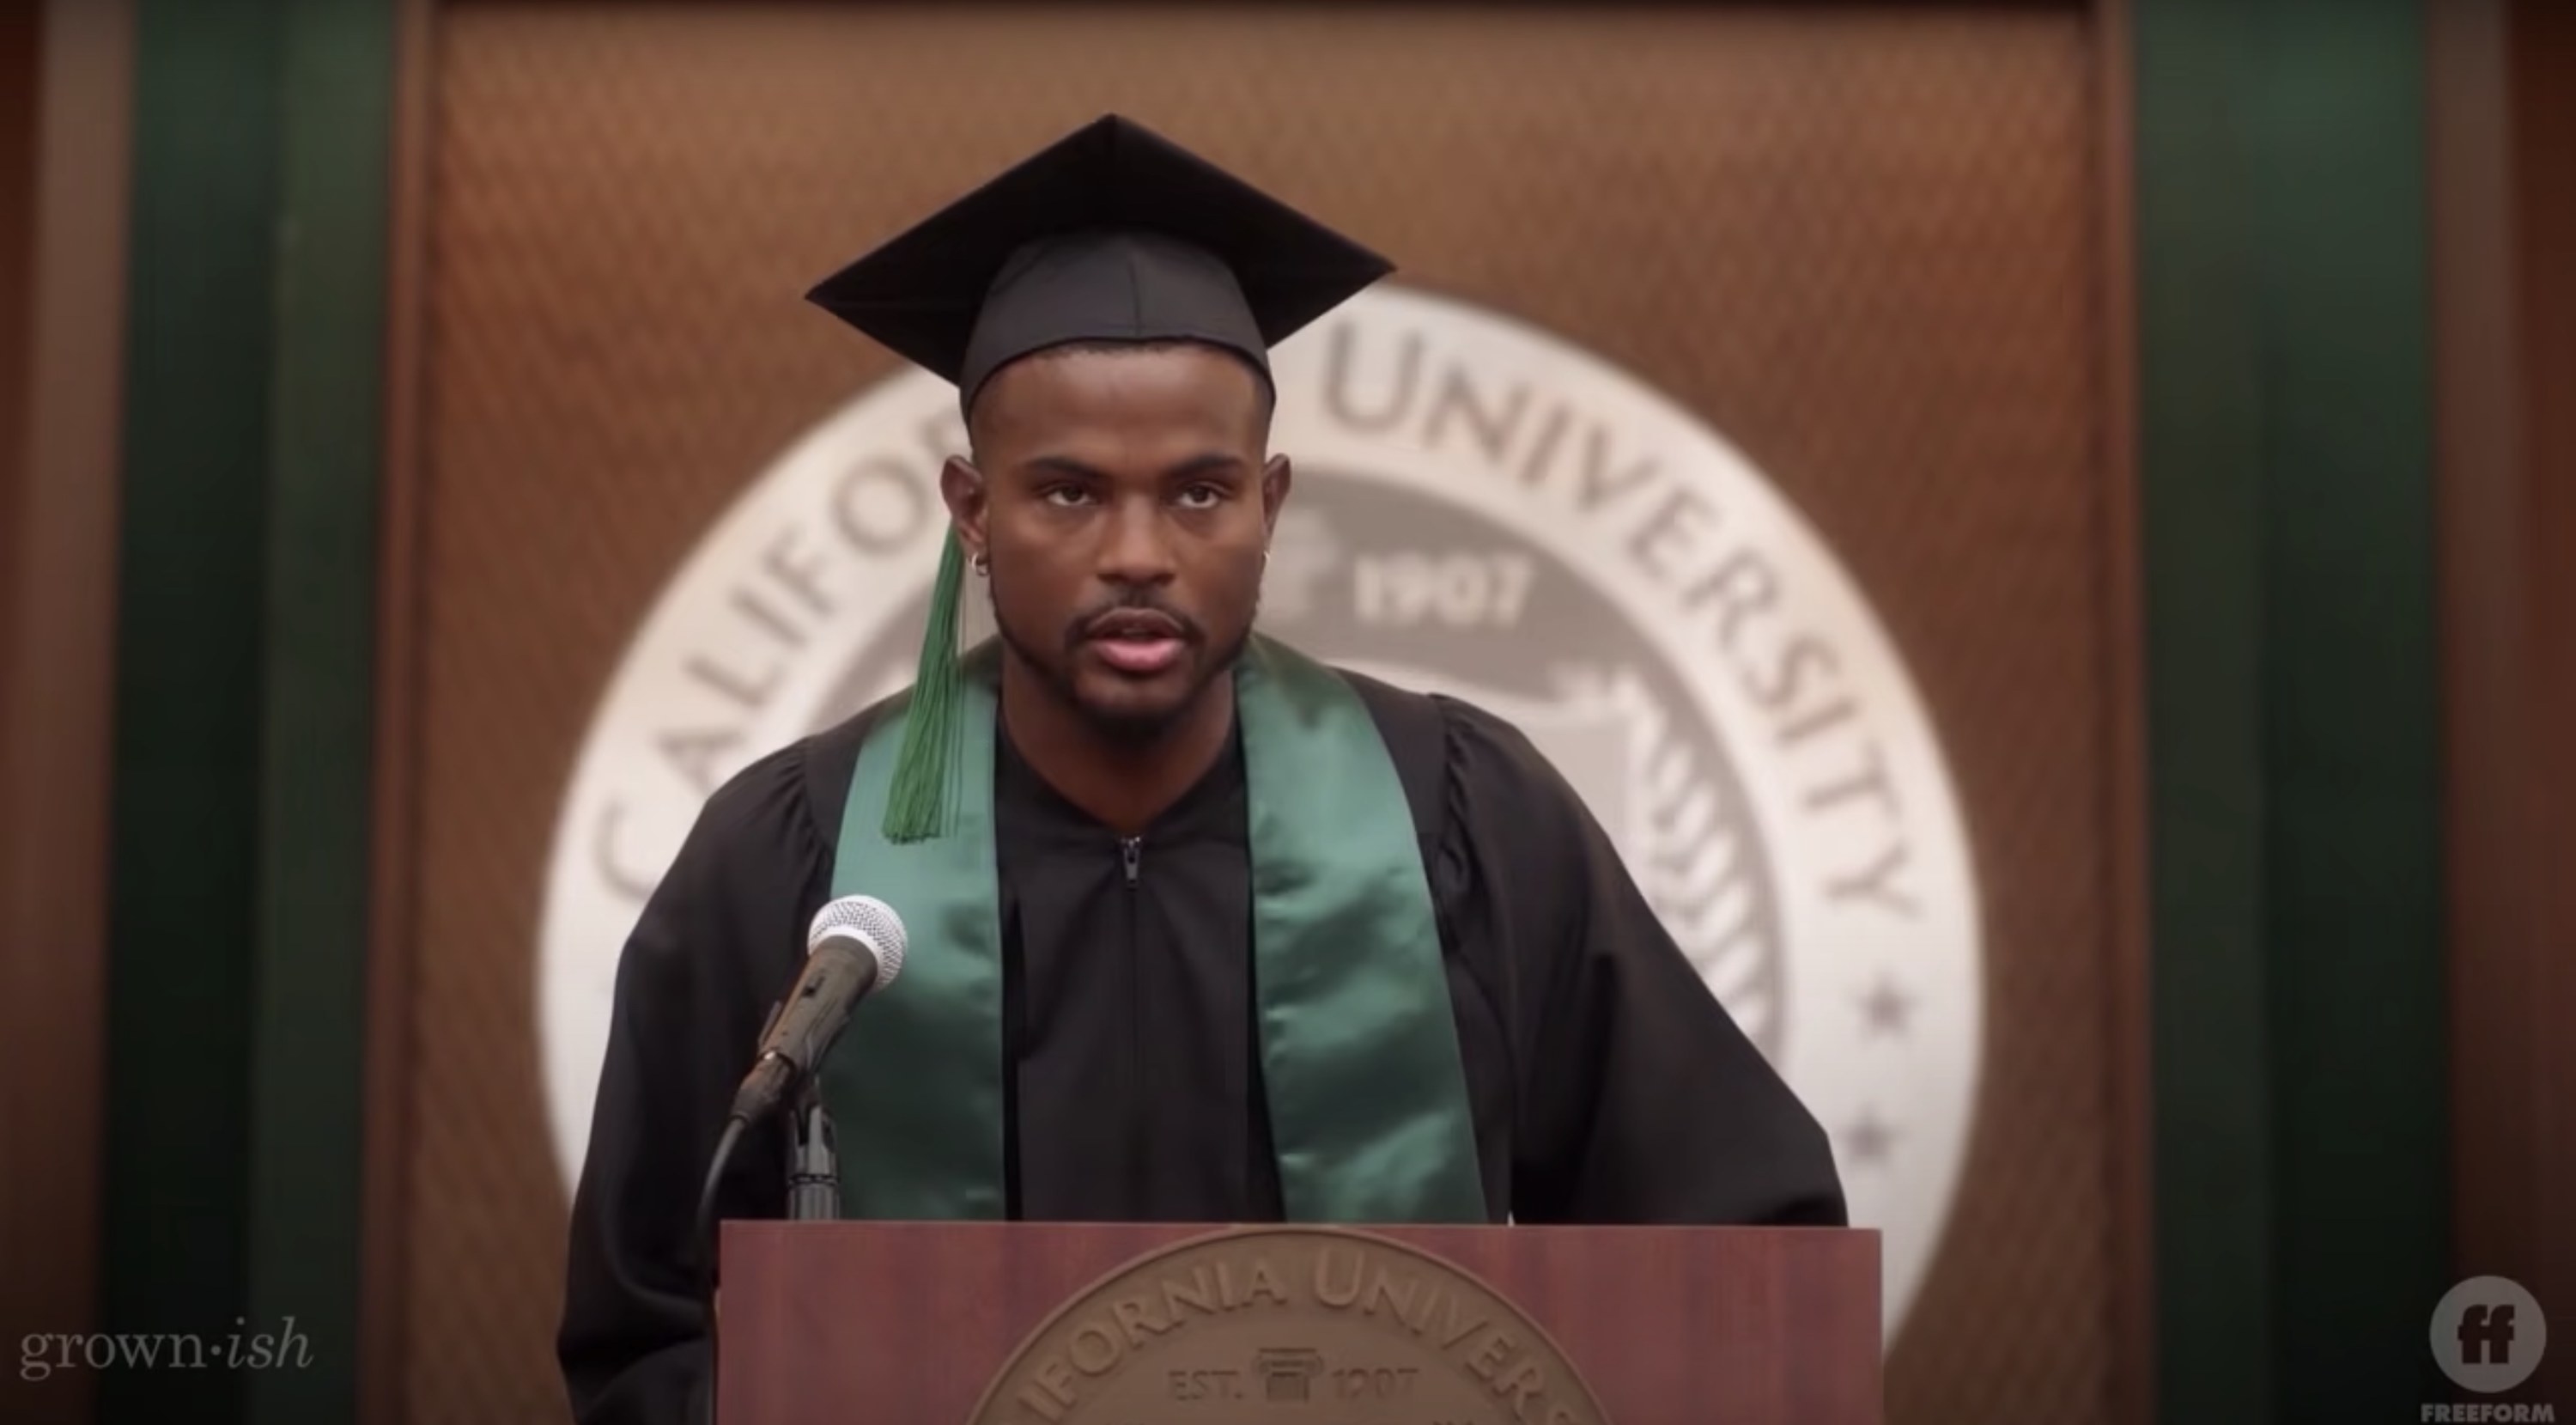 aaron in &quot;grown-ish&quot; delivers a speech during graduataion